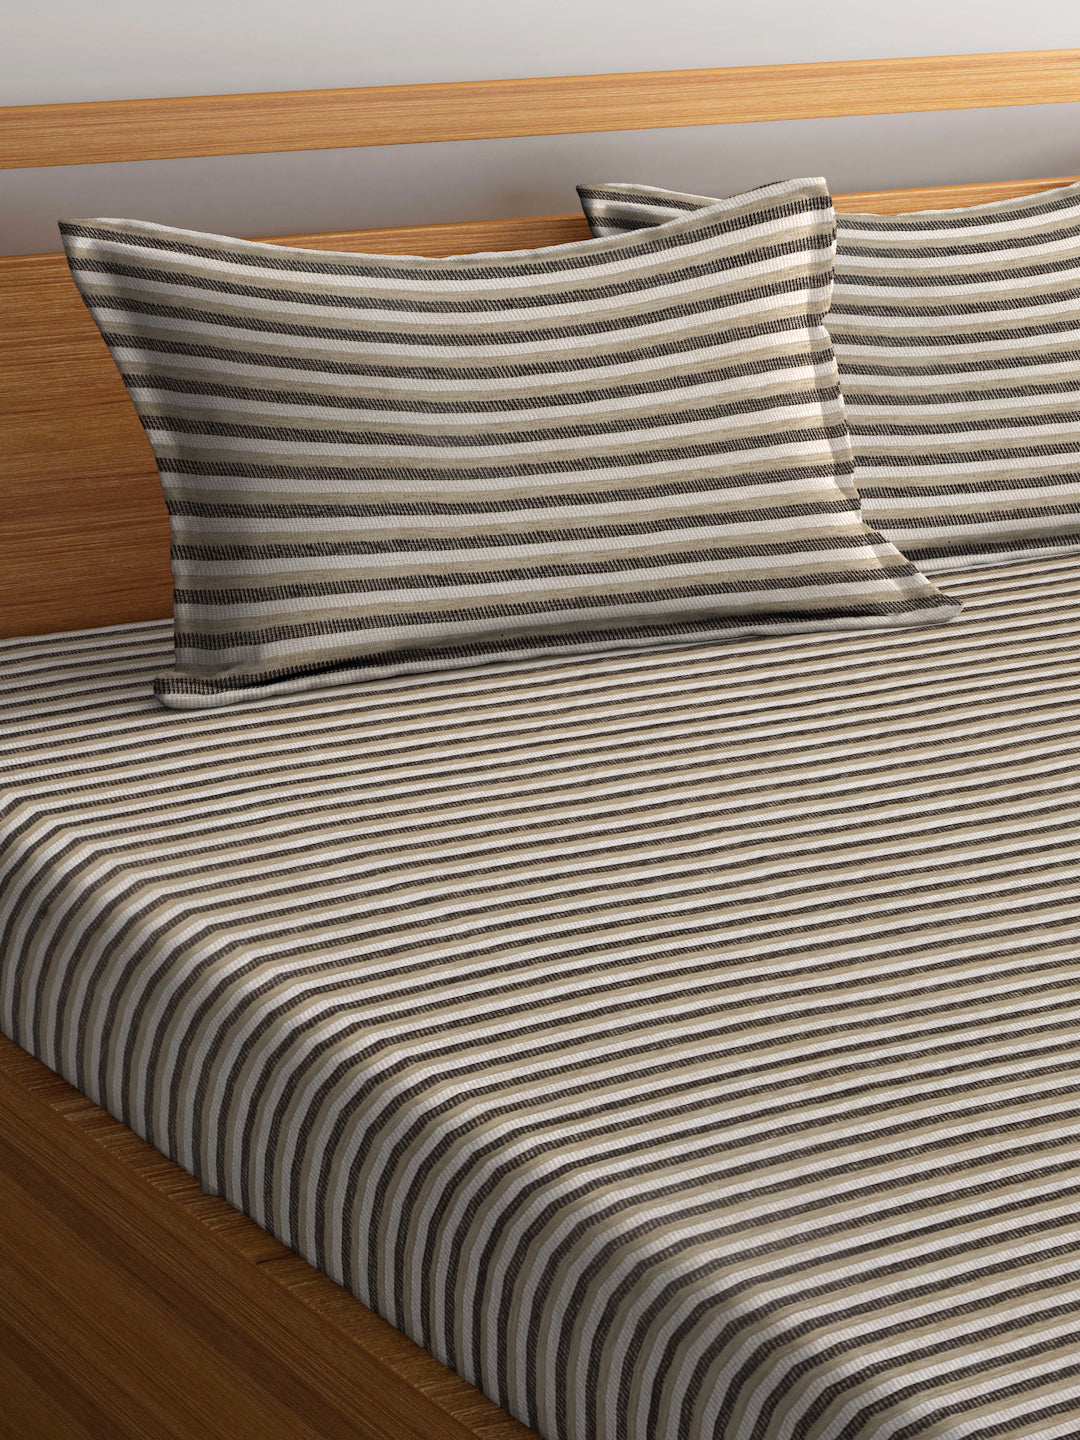 Arrabi Beige Stripes Handwoven Cotton King Size Bedsheet with 2 Pillow Covers (260 X 230 cm)